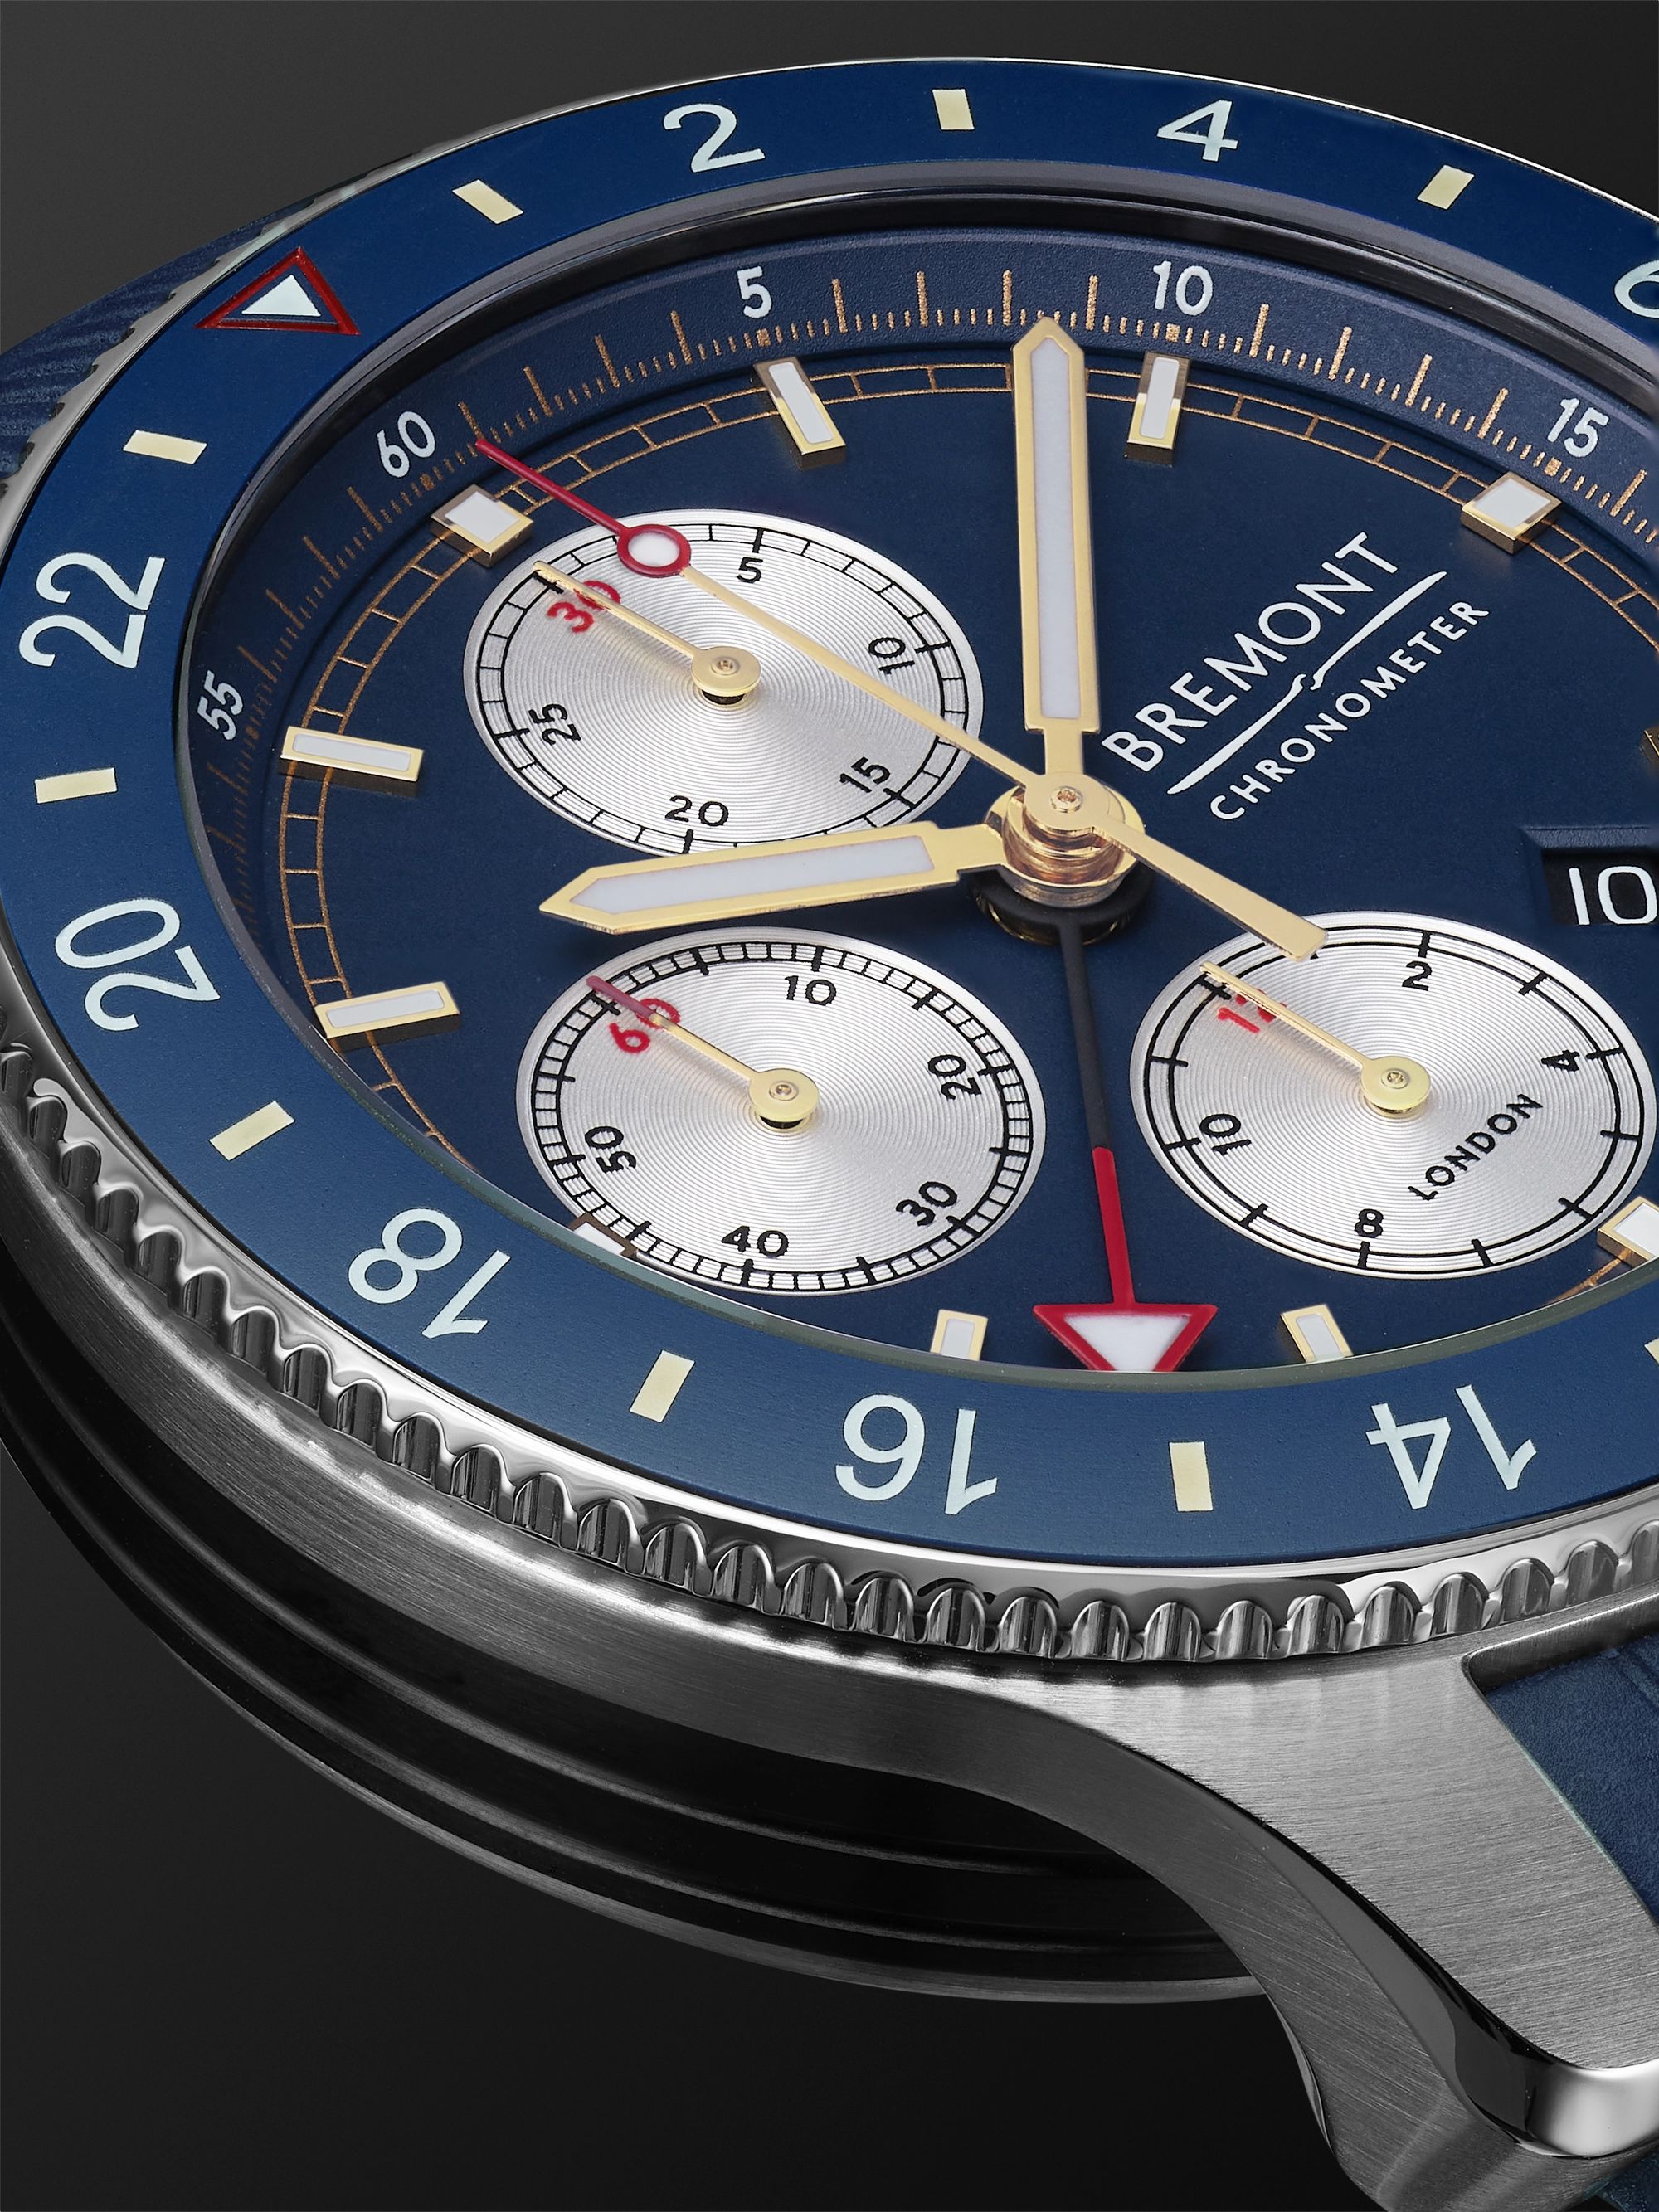 BREMONT Supermarine Sport Automatic Chronograph 43mm Stainless Steel and Rubber Watch, Ref. No. S200